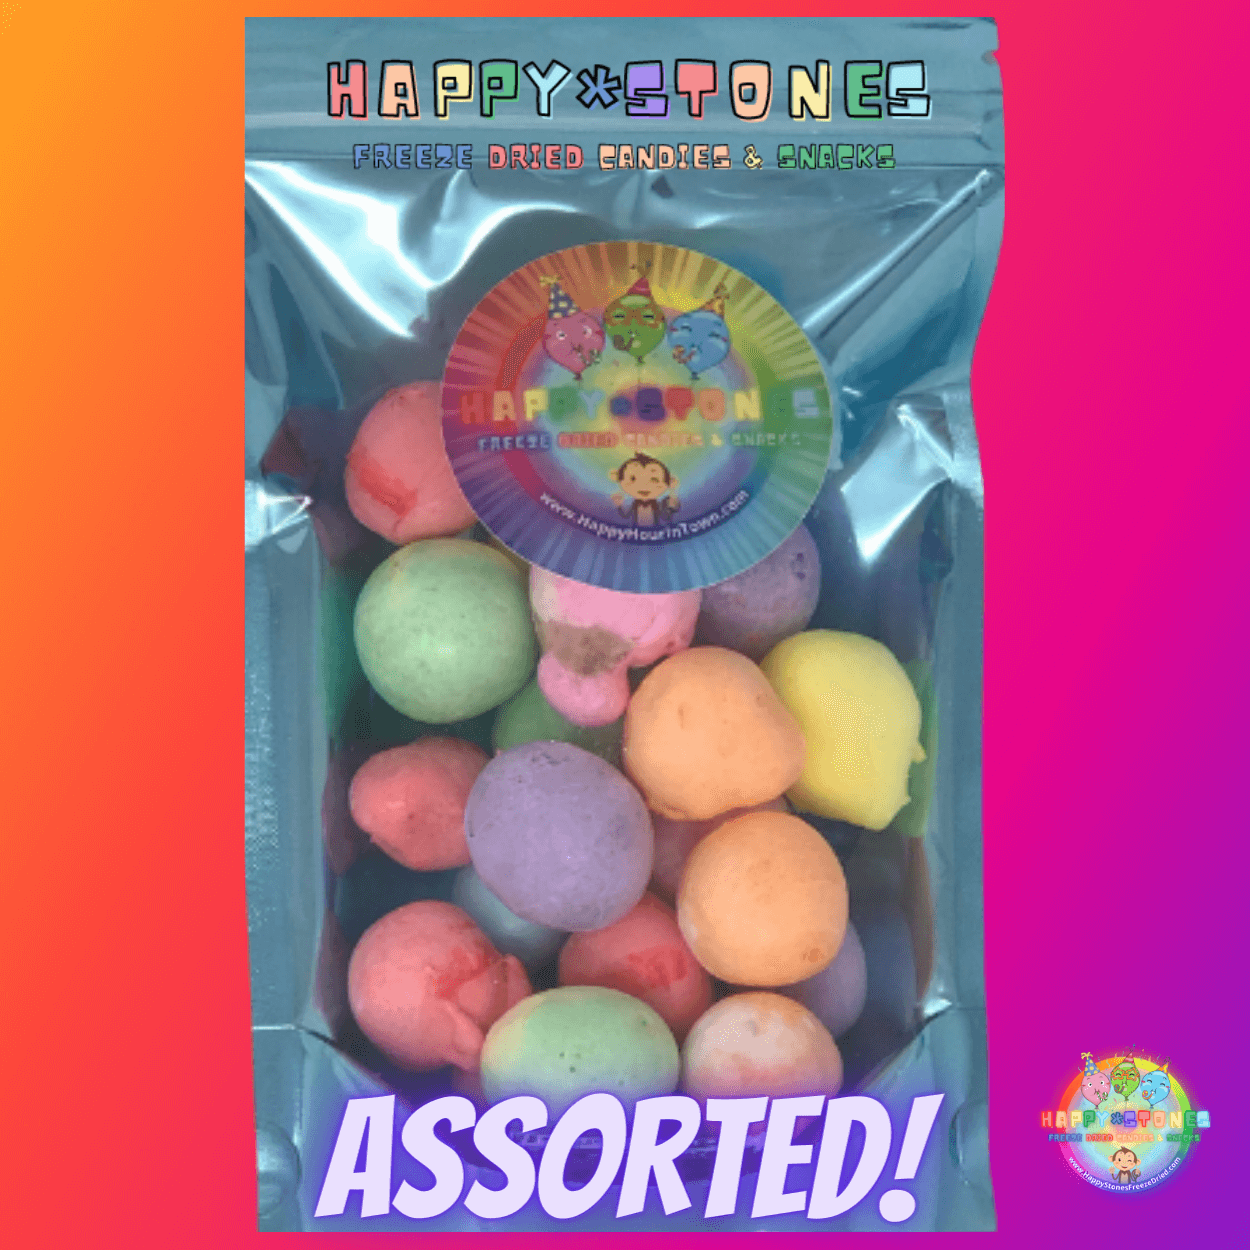 Freeze Dried Salt Water Taffy Candy You Can Eat With Braces - Assorted Flavors Big Top Stones